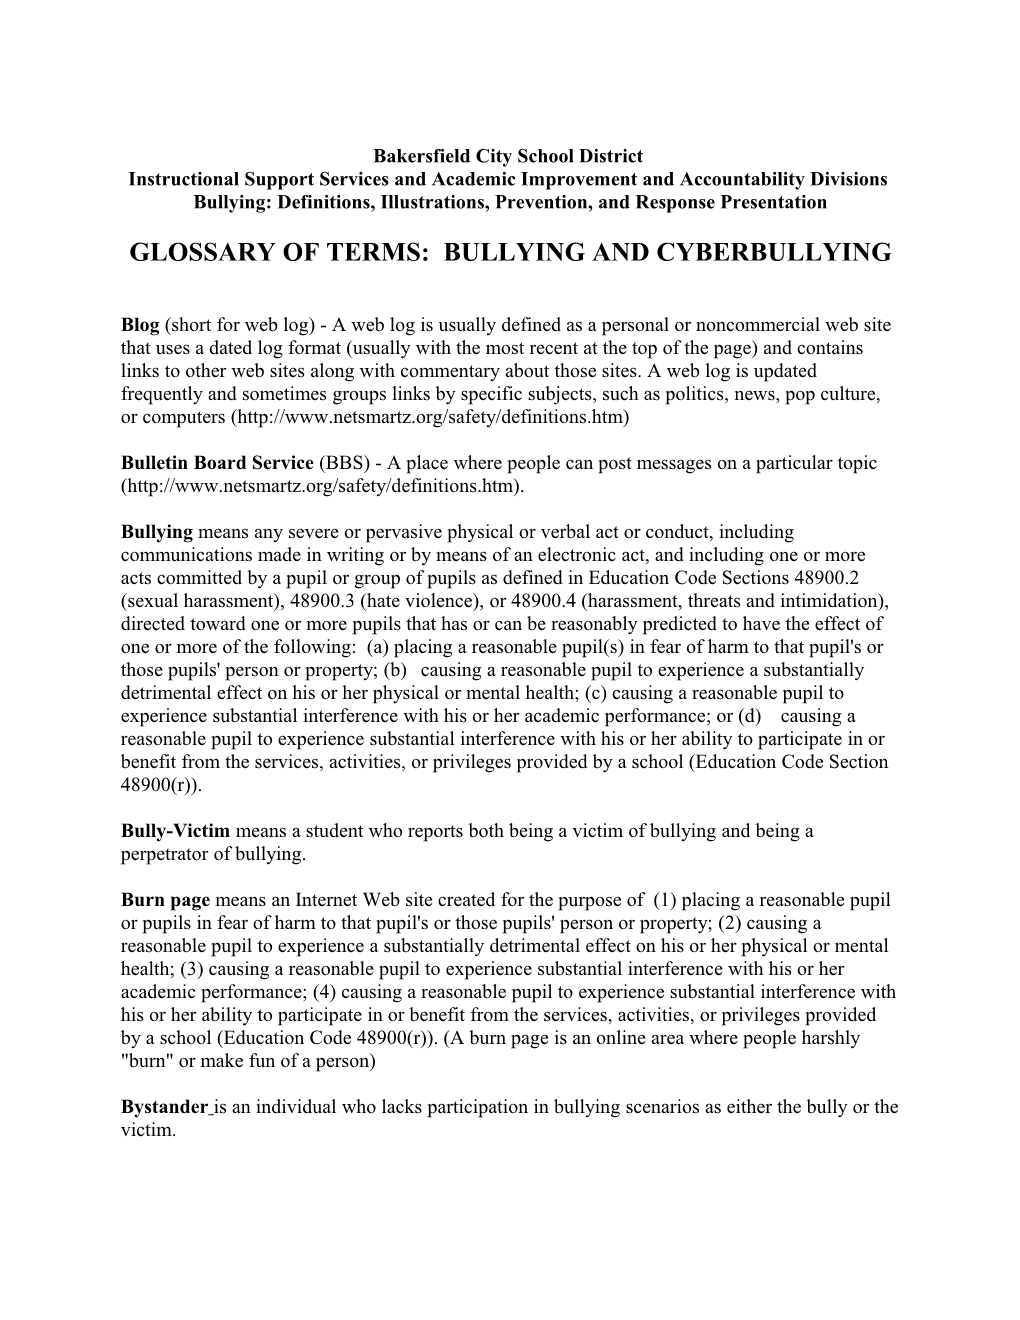 Glossary of Terms: Bullying and Cyberbullying (Continued) Page 4